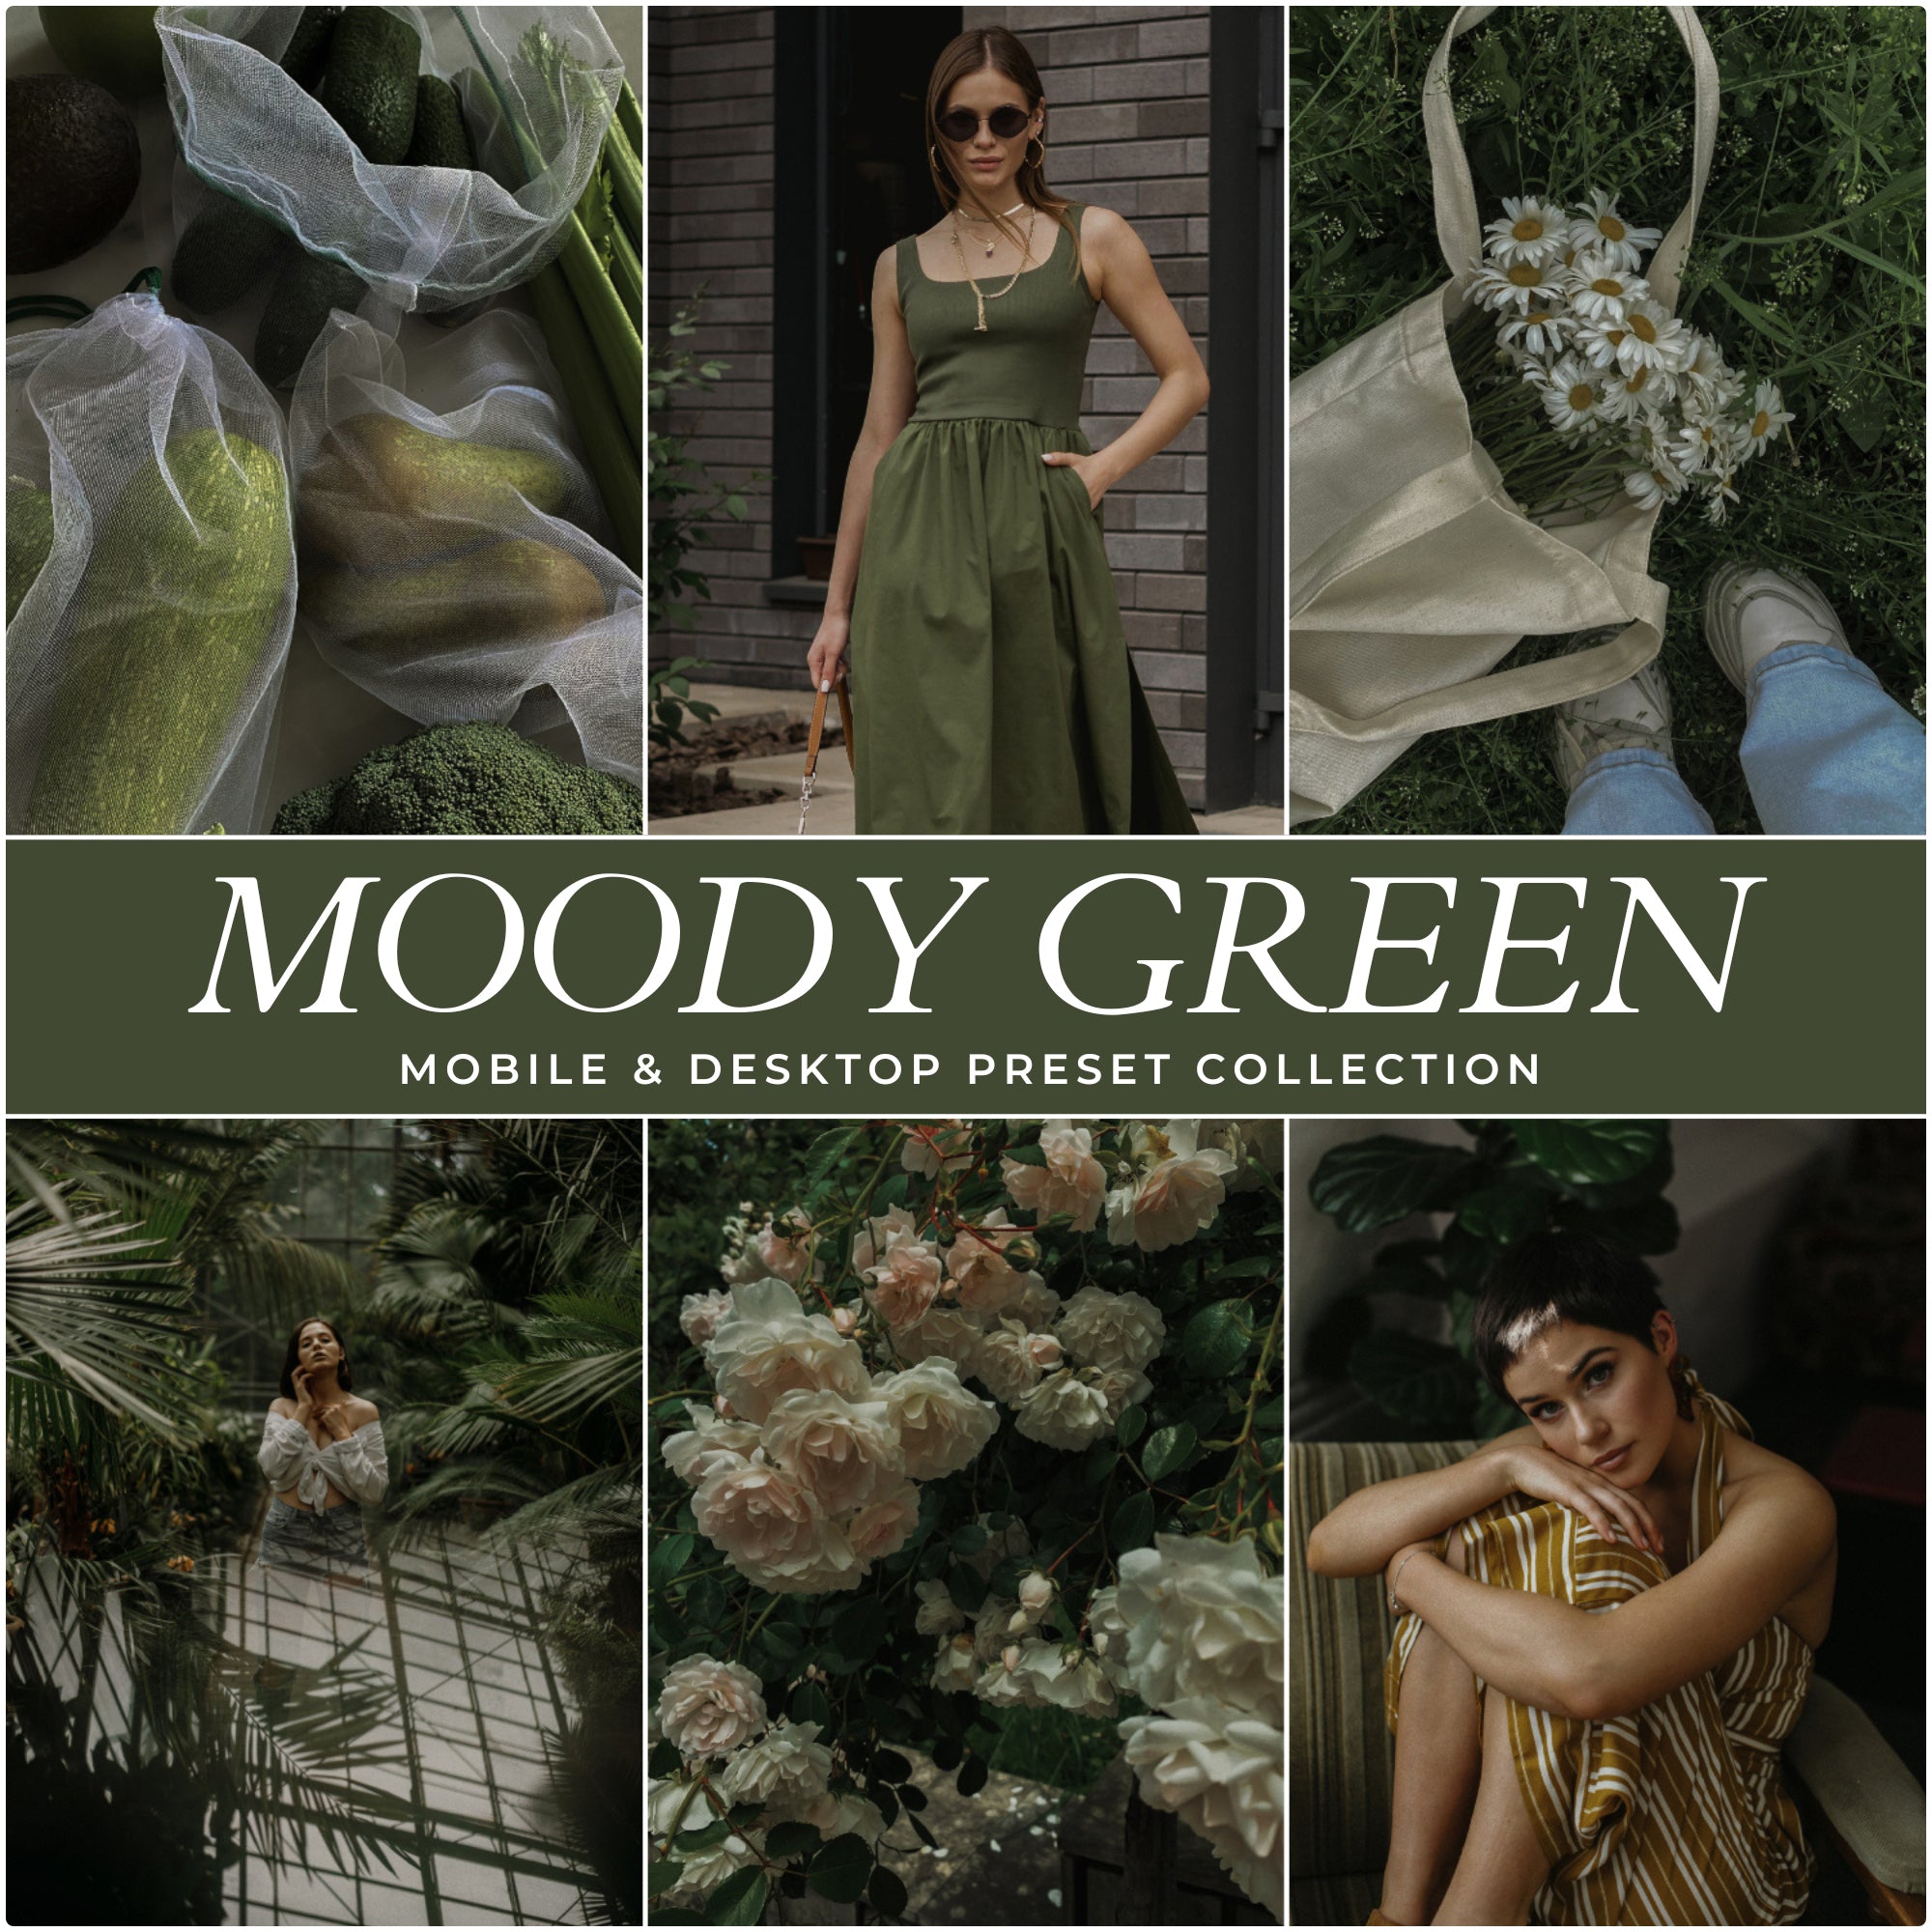 Moody Green Lightroom Presets For Photographers and Instagram Influencers Photo Editing In Adobe Lightroom By Lou And Marks Presets